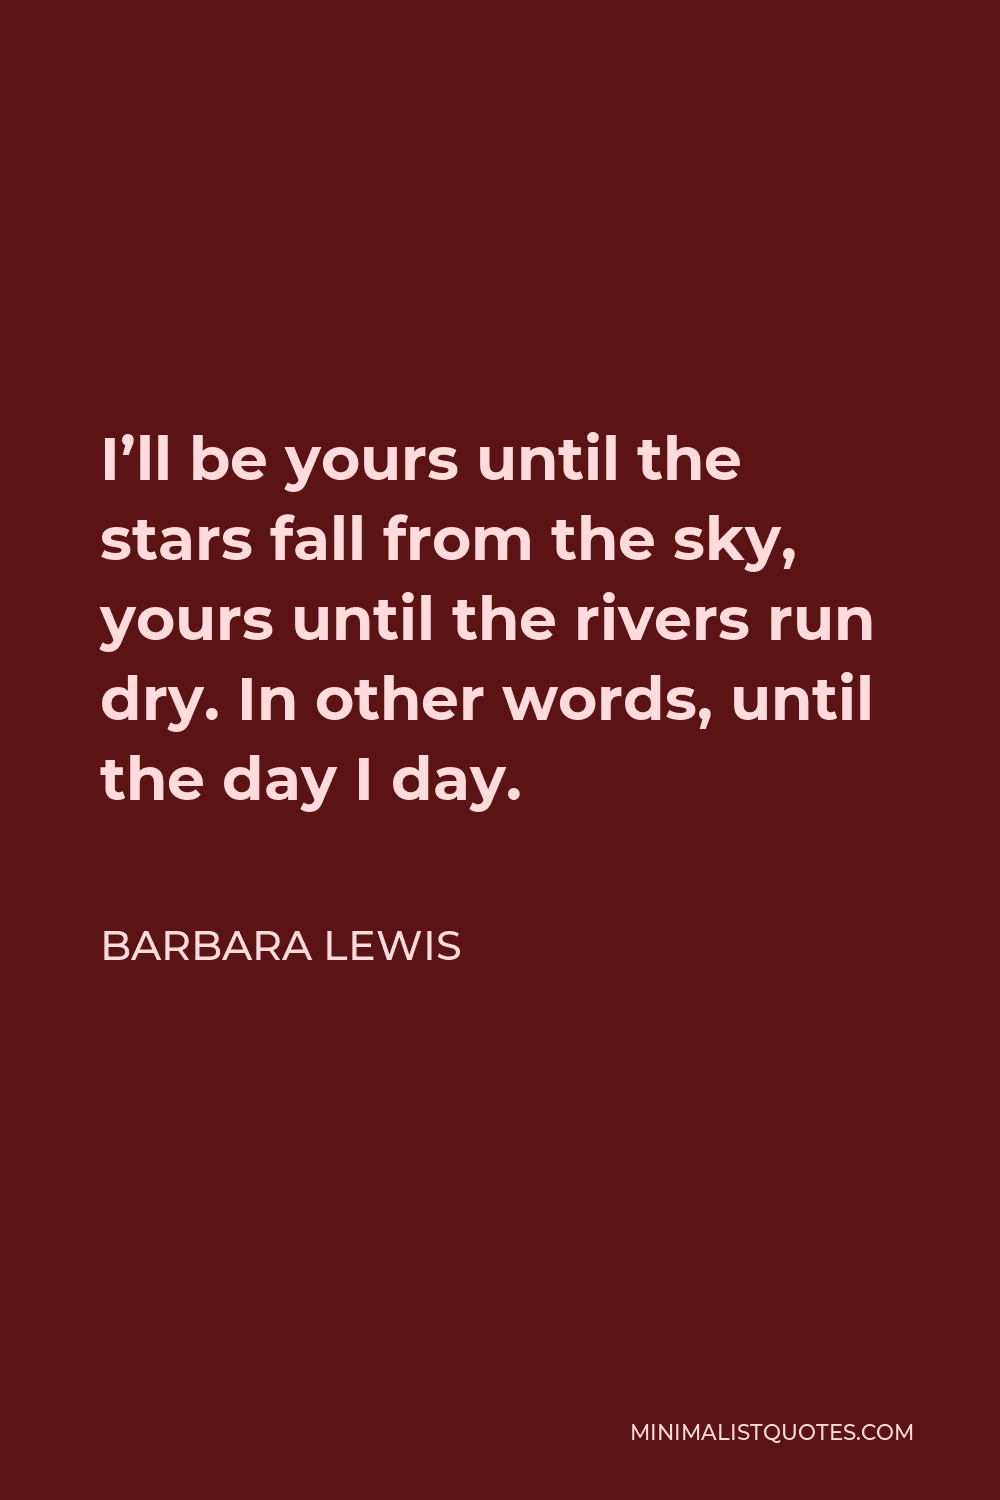 Until The Rivers Run Dry